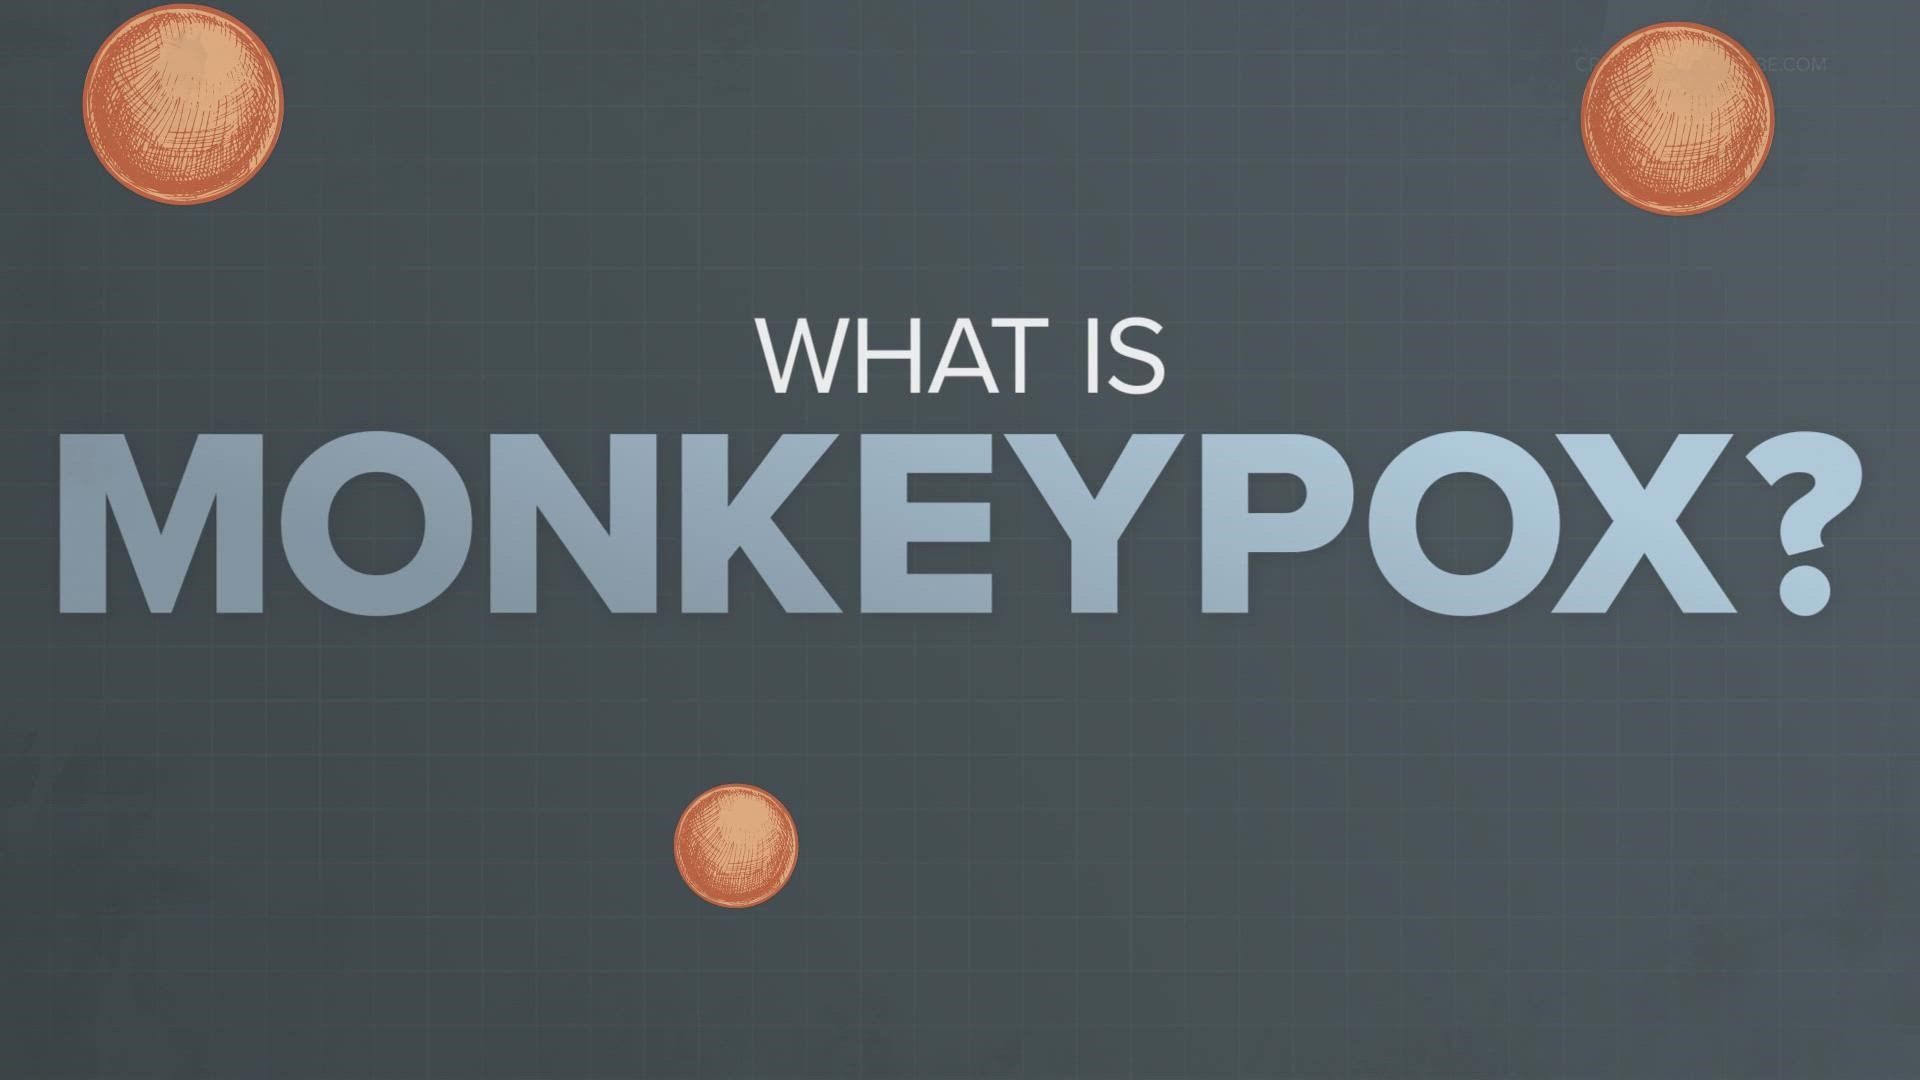 Monkeypox was first tested in monkeys, but that's not where it originated.